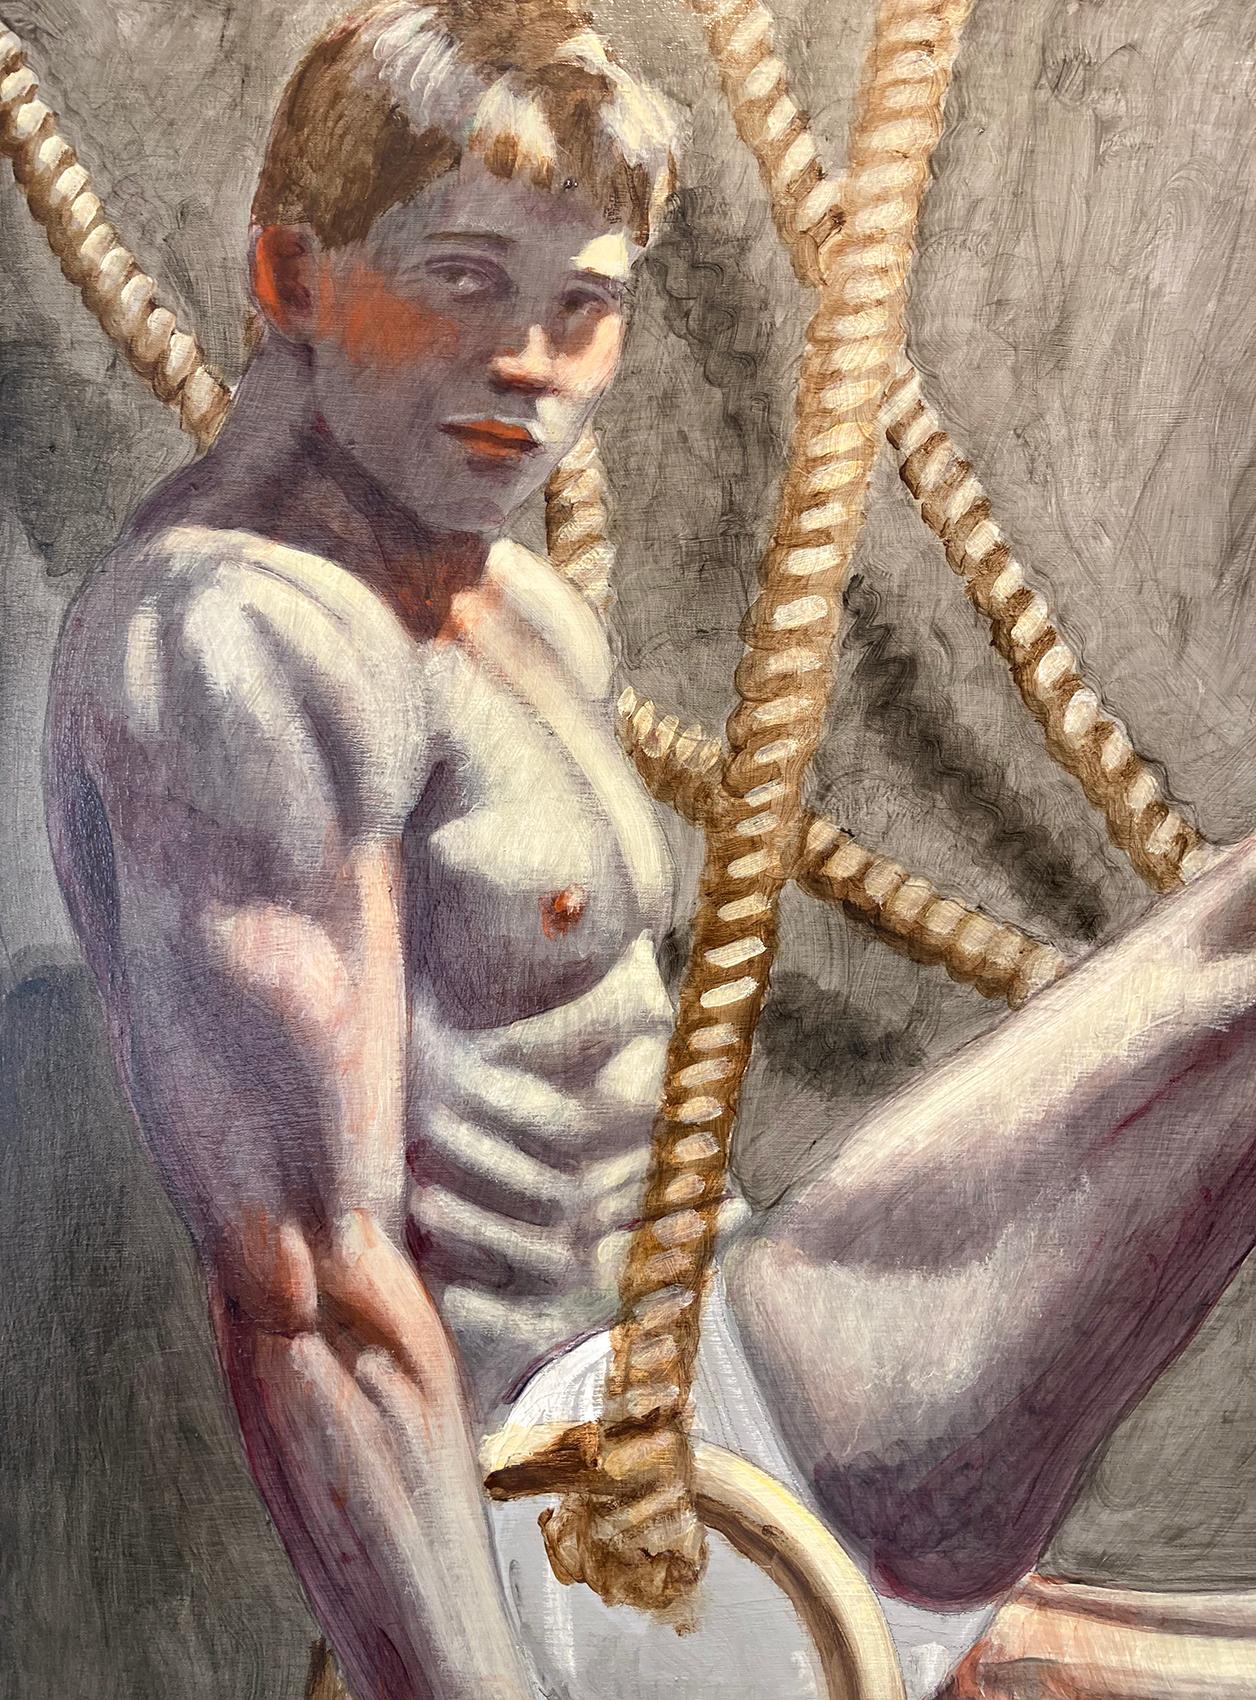 Gymnasts with Rings (Figurative Painting of Two Male Athletes by Mark Beard) 1